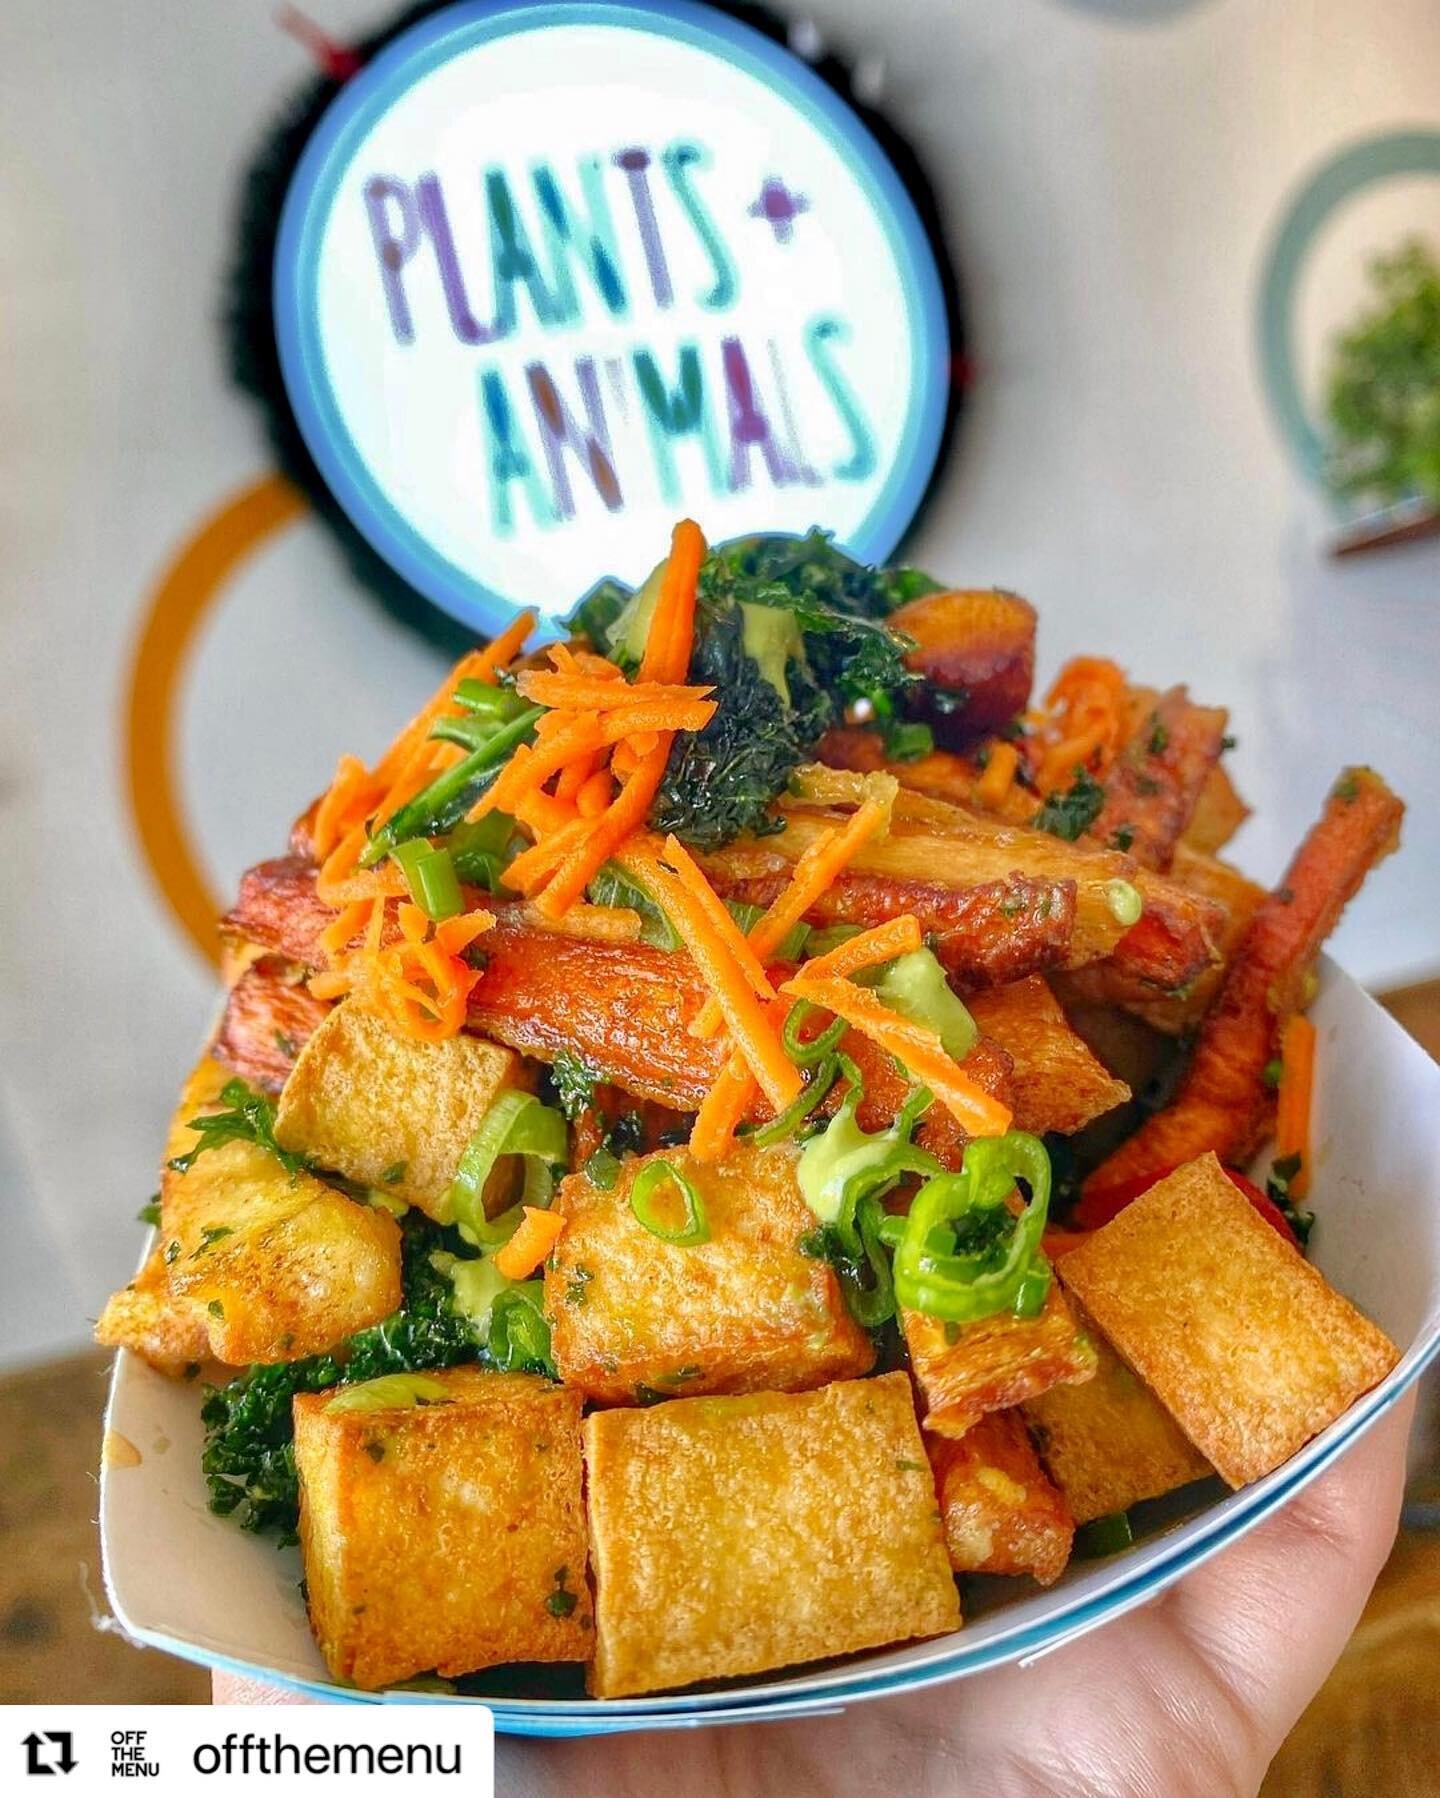 ❤️&zwj;🔥 SECRET MENU ALERT ❤️&zwj;🔥 @offthemenu⁠⁠
⁠⁠
If you want to try our Loaded Tofu Fries (signature carrot and parsnip fries tossed with crispy lemon herb tofu, crispy kale, pickled fresnos and spicy aji sauce) you gotta be part of the club 😎